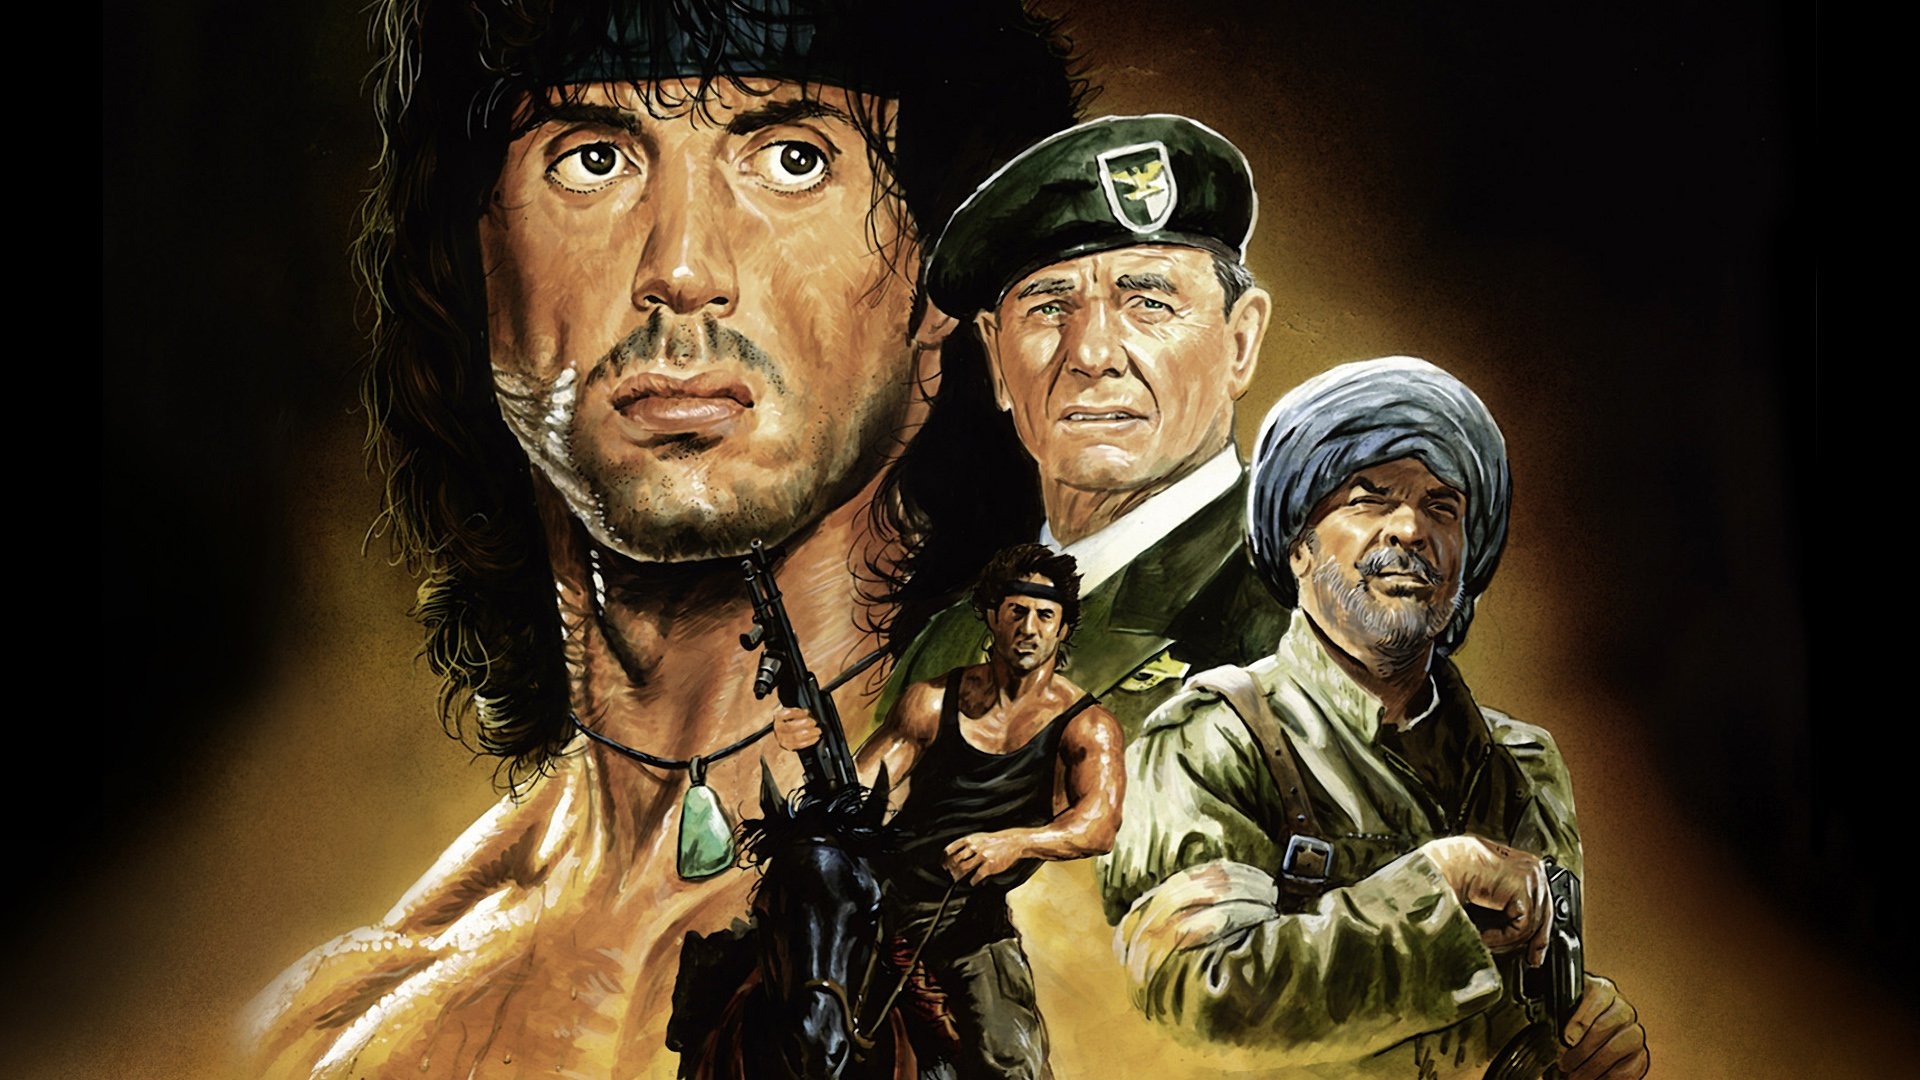 Rambo III info, Poster collection, HD wallpapers, Movie facts, 1920x1080 Full HD Desktop